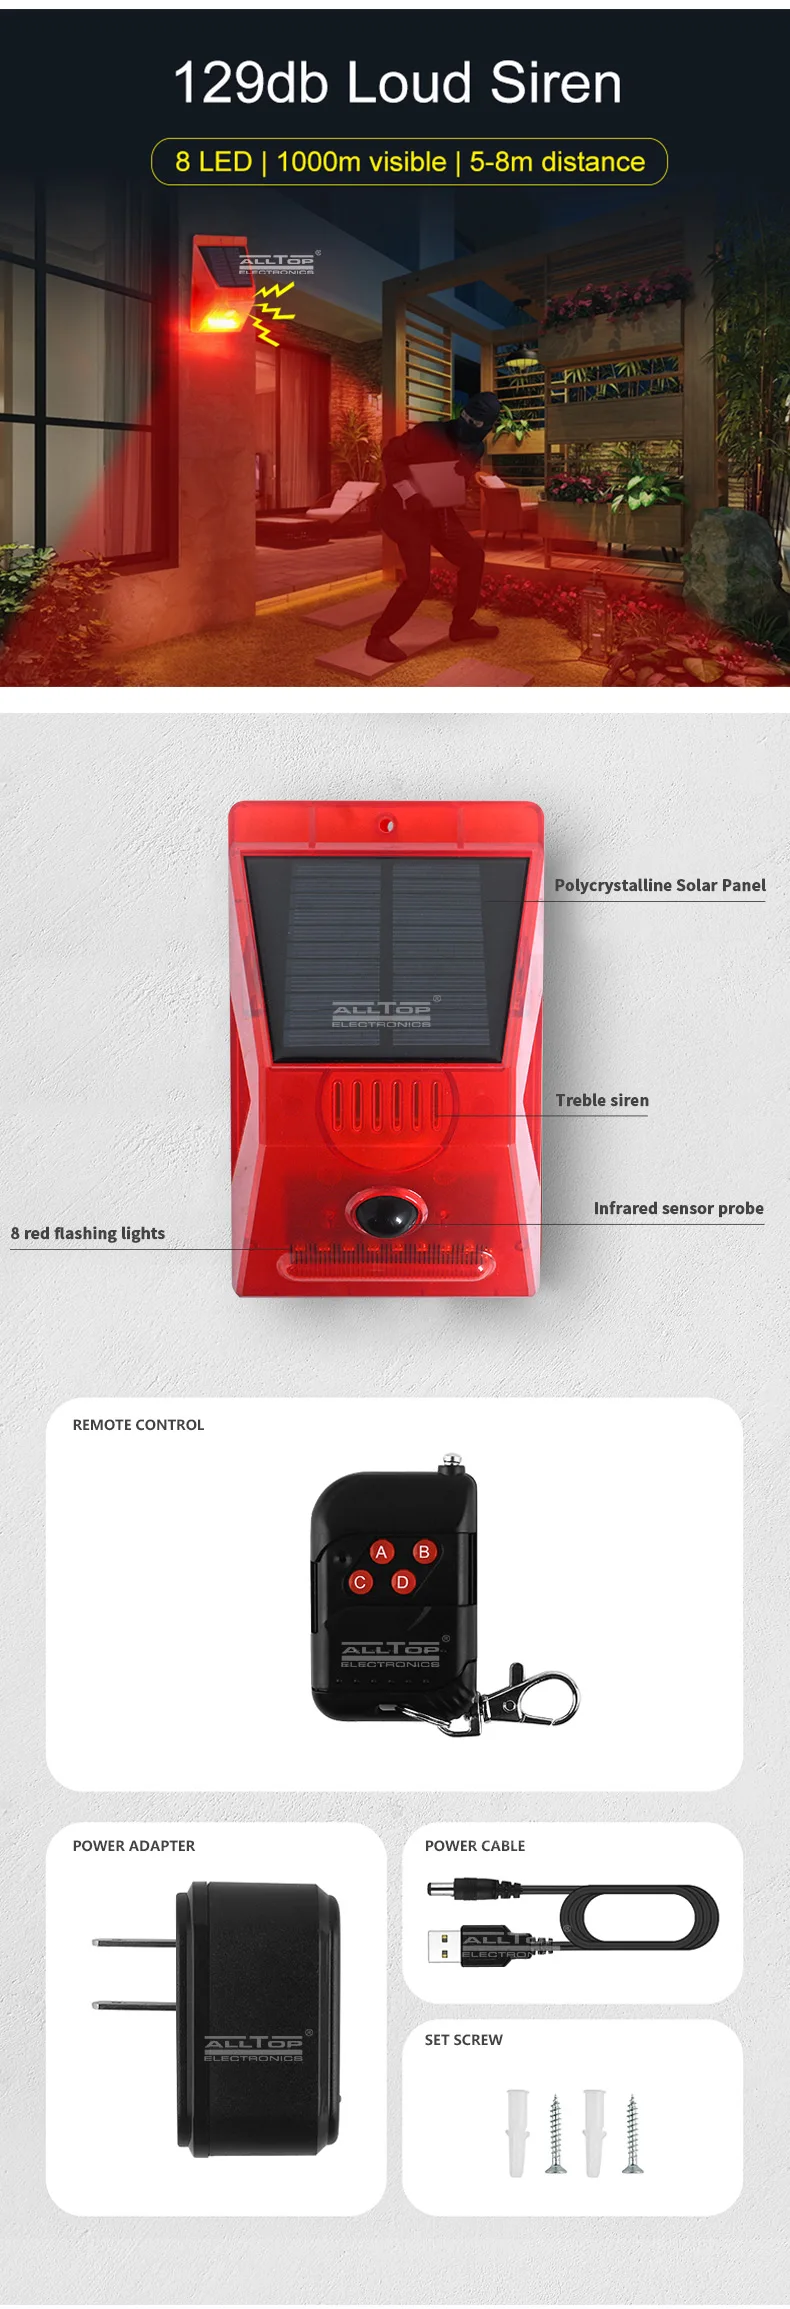 ALLTOP Supplier Hot On Sell Solar Alarm Warning Light With Remote Controlled Home Security Alarm Light